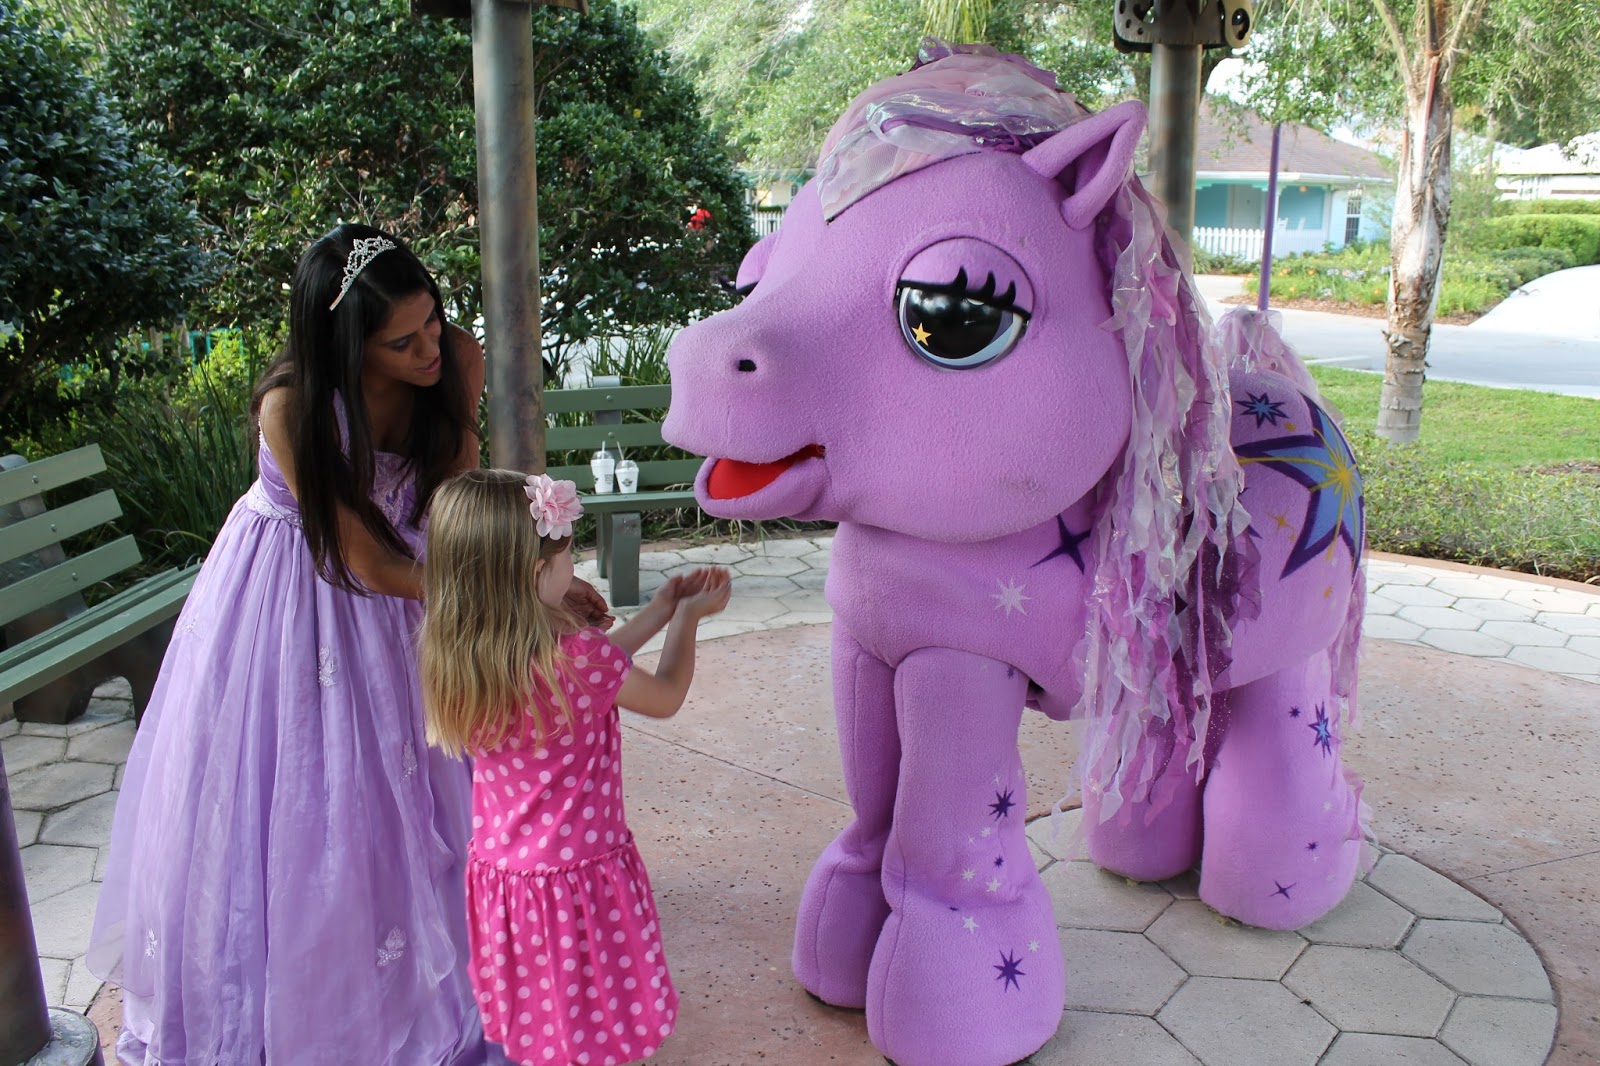 Janelle's Wish: Janelle and a Real Live My Little Pony